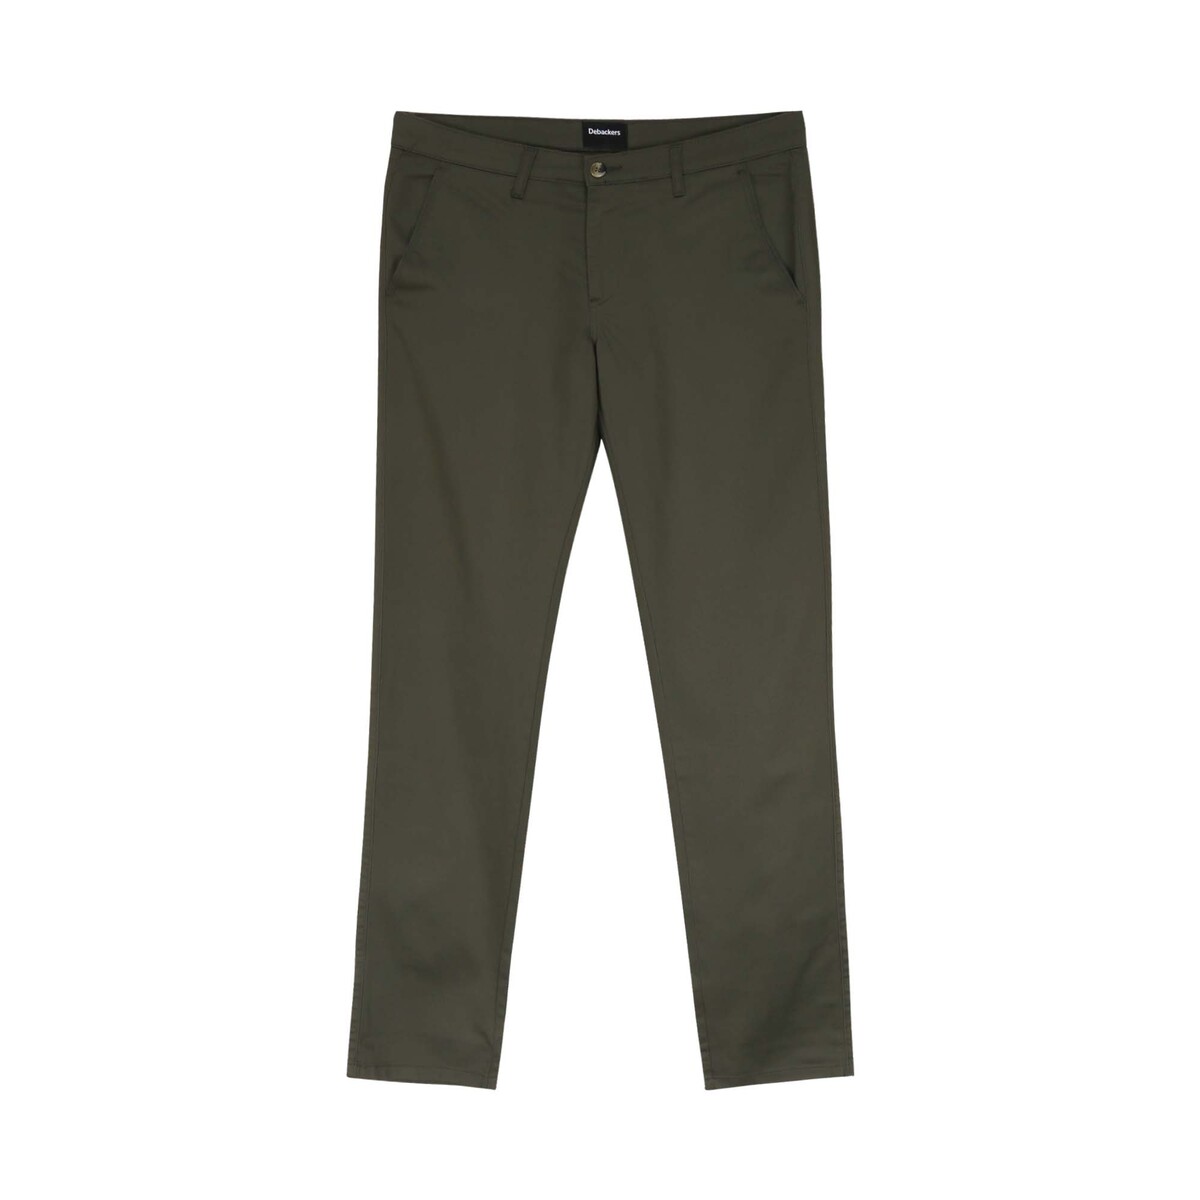 Debackers Men's Casual Trouser Flat Front 20101 Olive 32